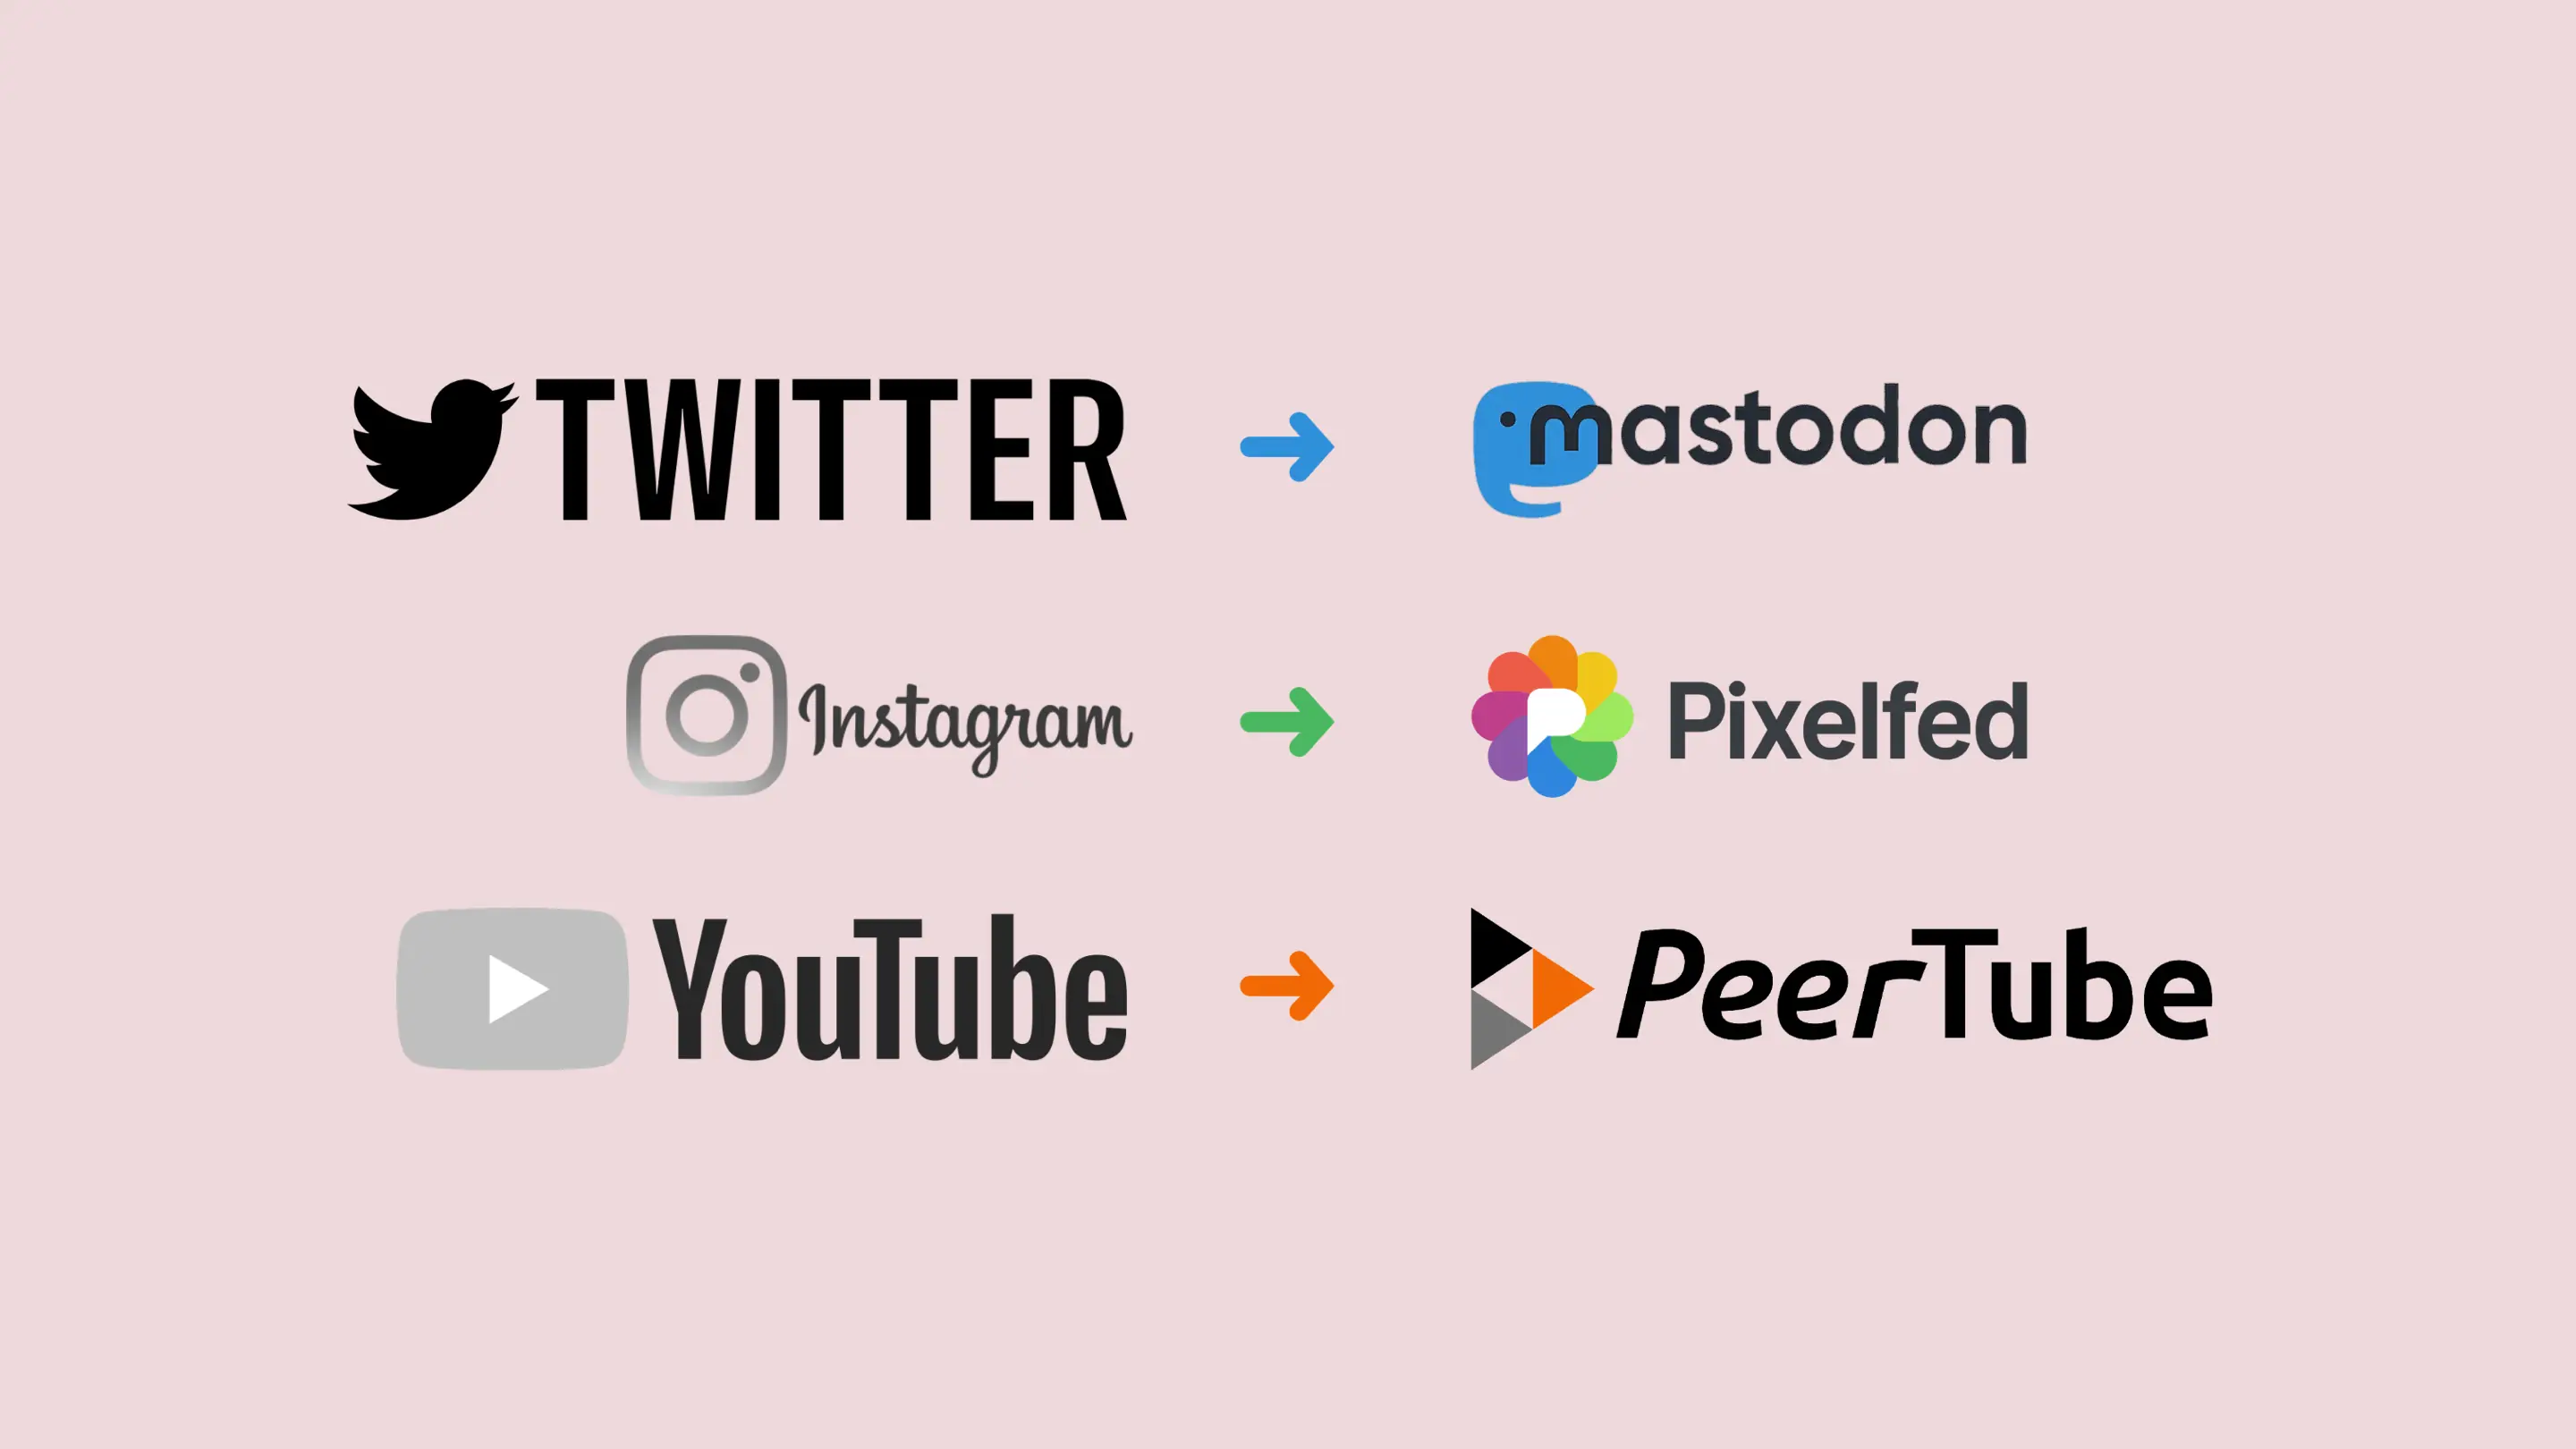 Arrows going from Twitter, Instagram, and YouTube to Mastodon, Pixelfed, and PeerTube